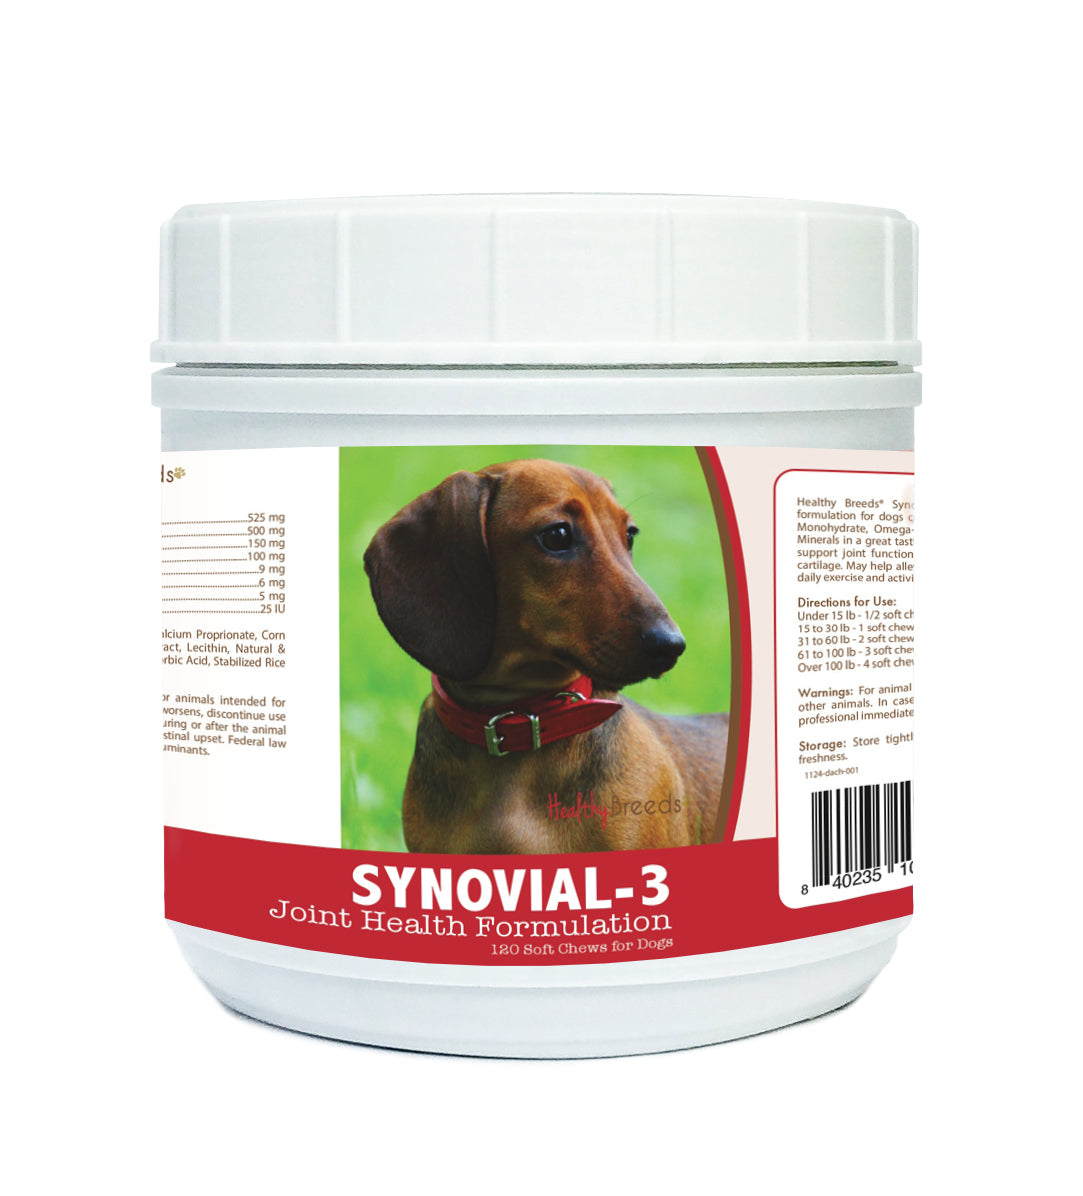 Dachshund Synovial-3 Joint Health Formulation Soft Chews 120 Count